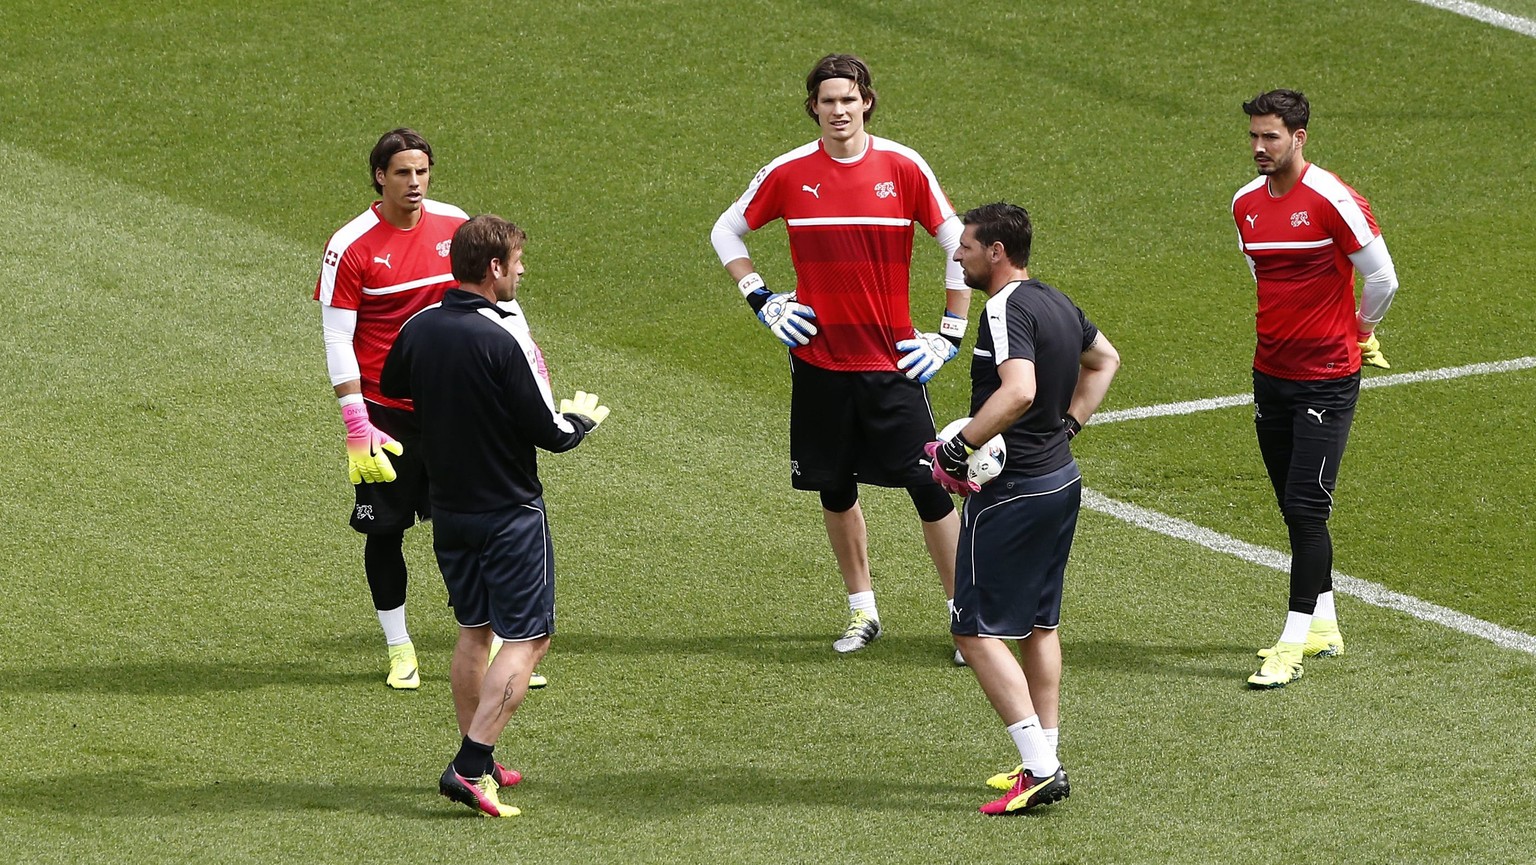 epa05364430 Switzerland goalkeepers Yann Sommer (l), Marwin Hitz (c) and Roman Buerki (r) during a training session, at the Parc des Princes stadium, in Paris, France, Tuesday, June 14, 2016. The Swis ...